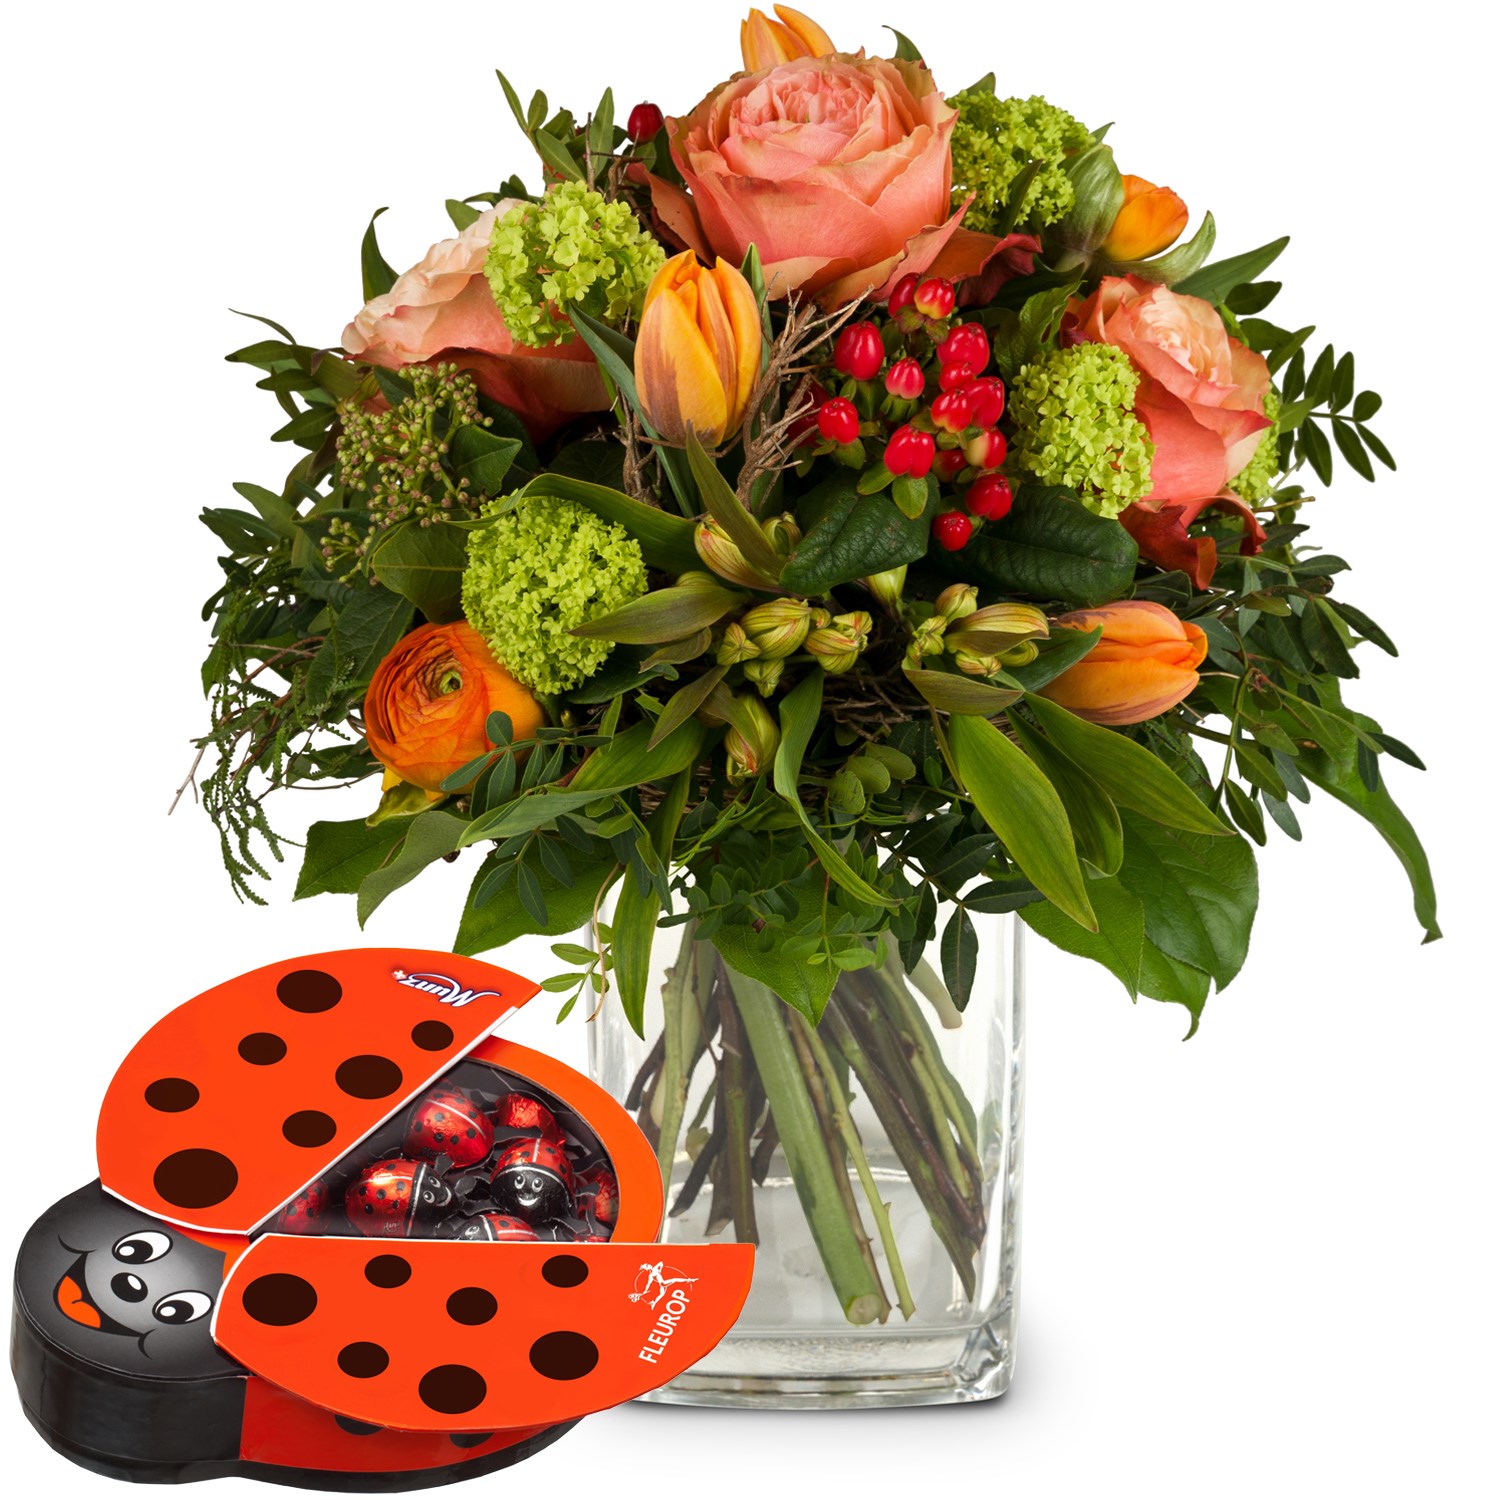 Signs of Spring with Munz chocolate ladybird